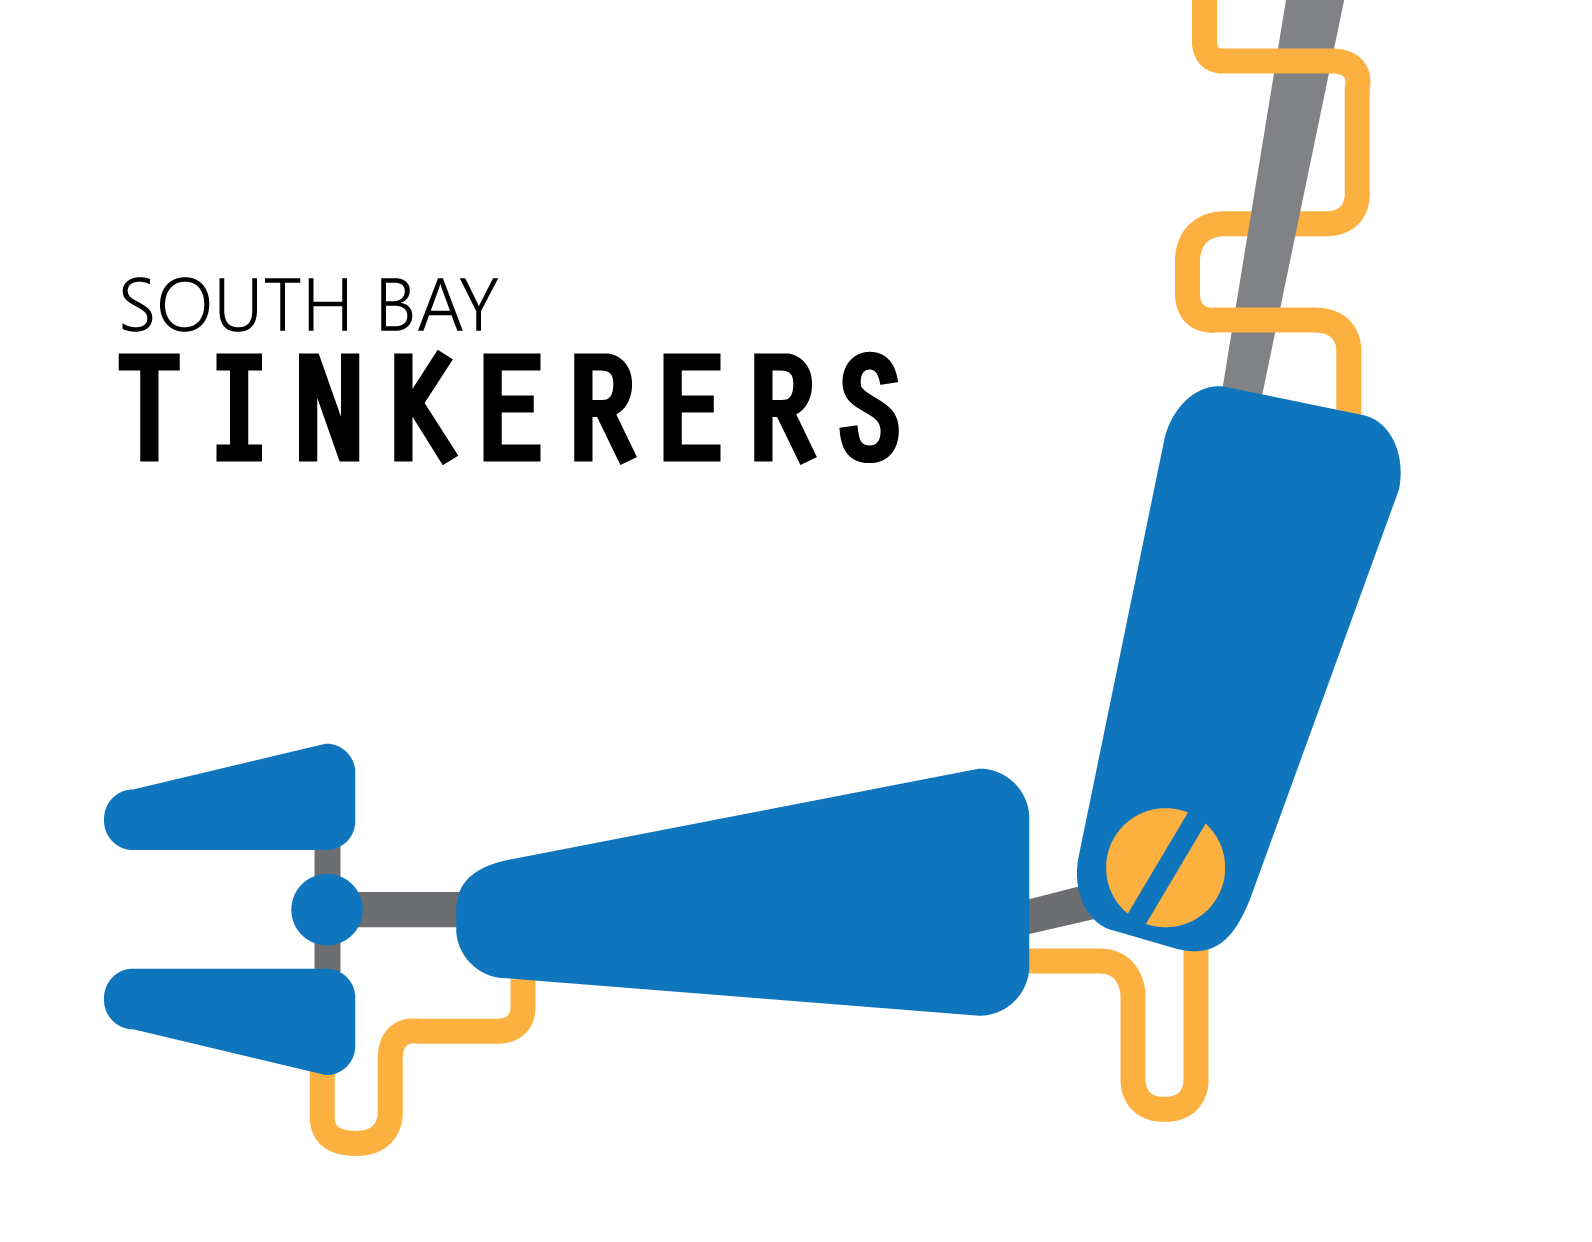 South Bay Tinkerers